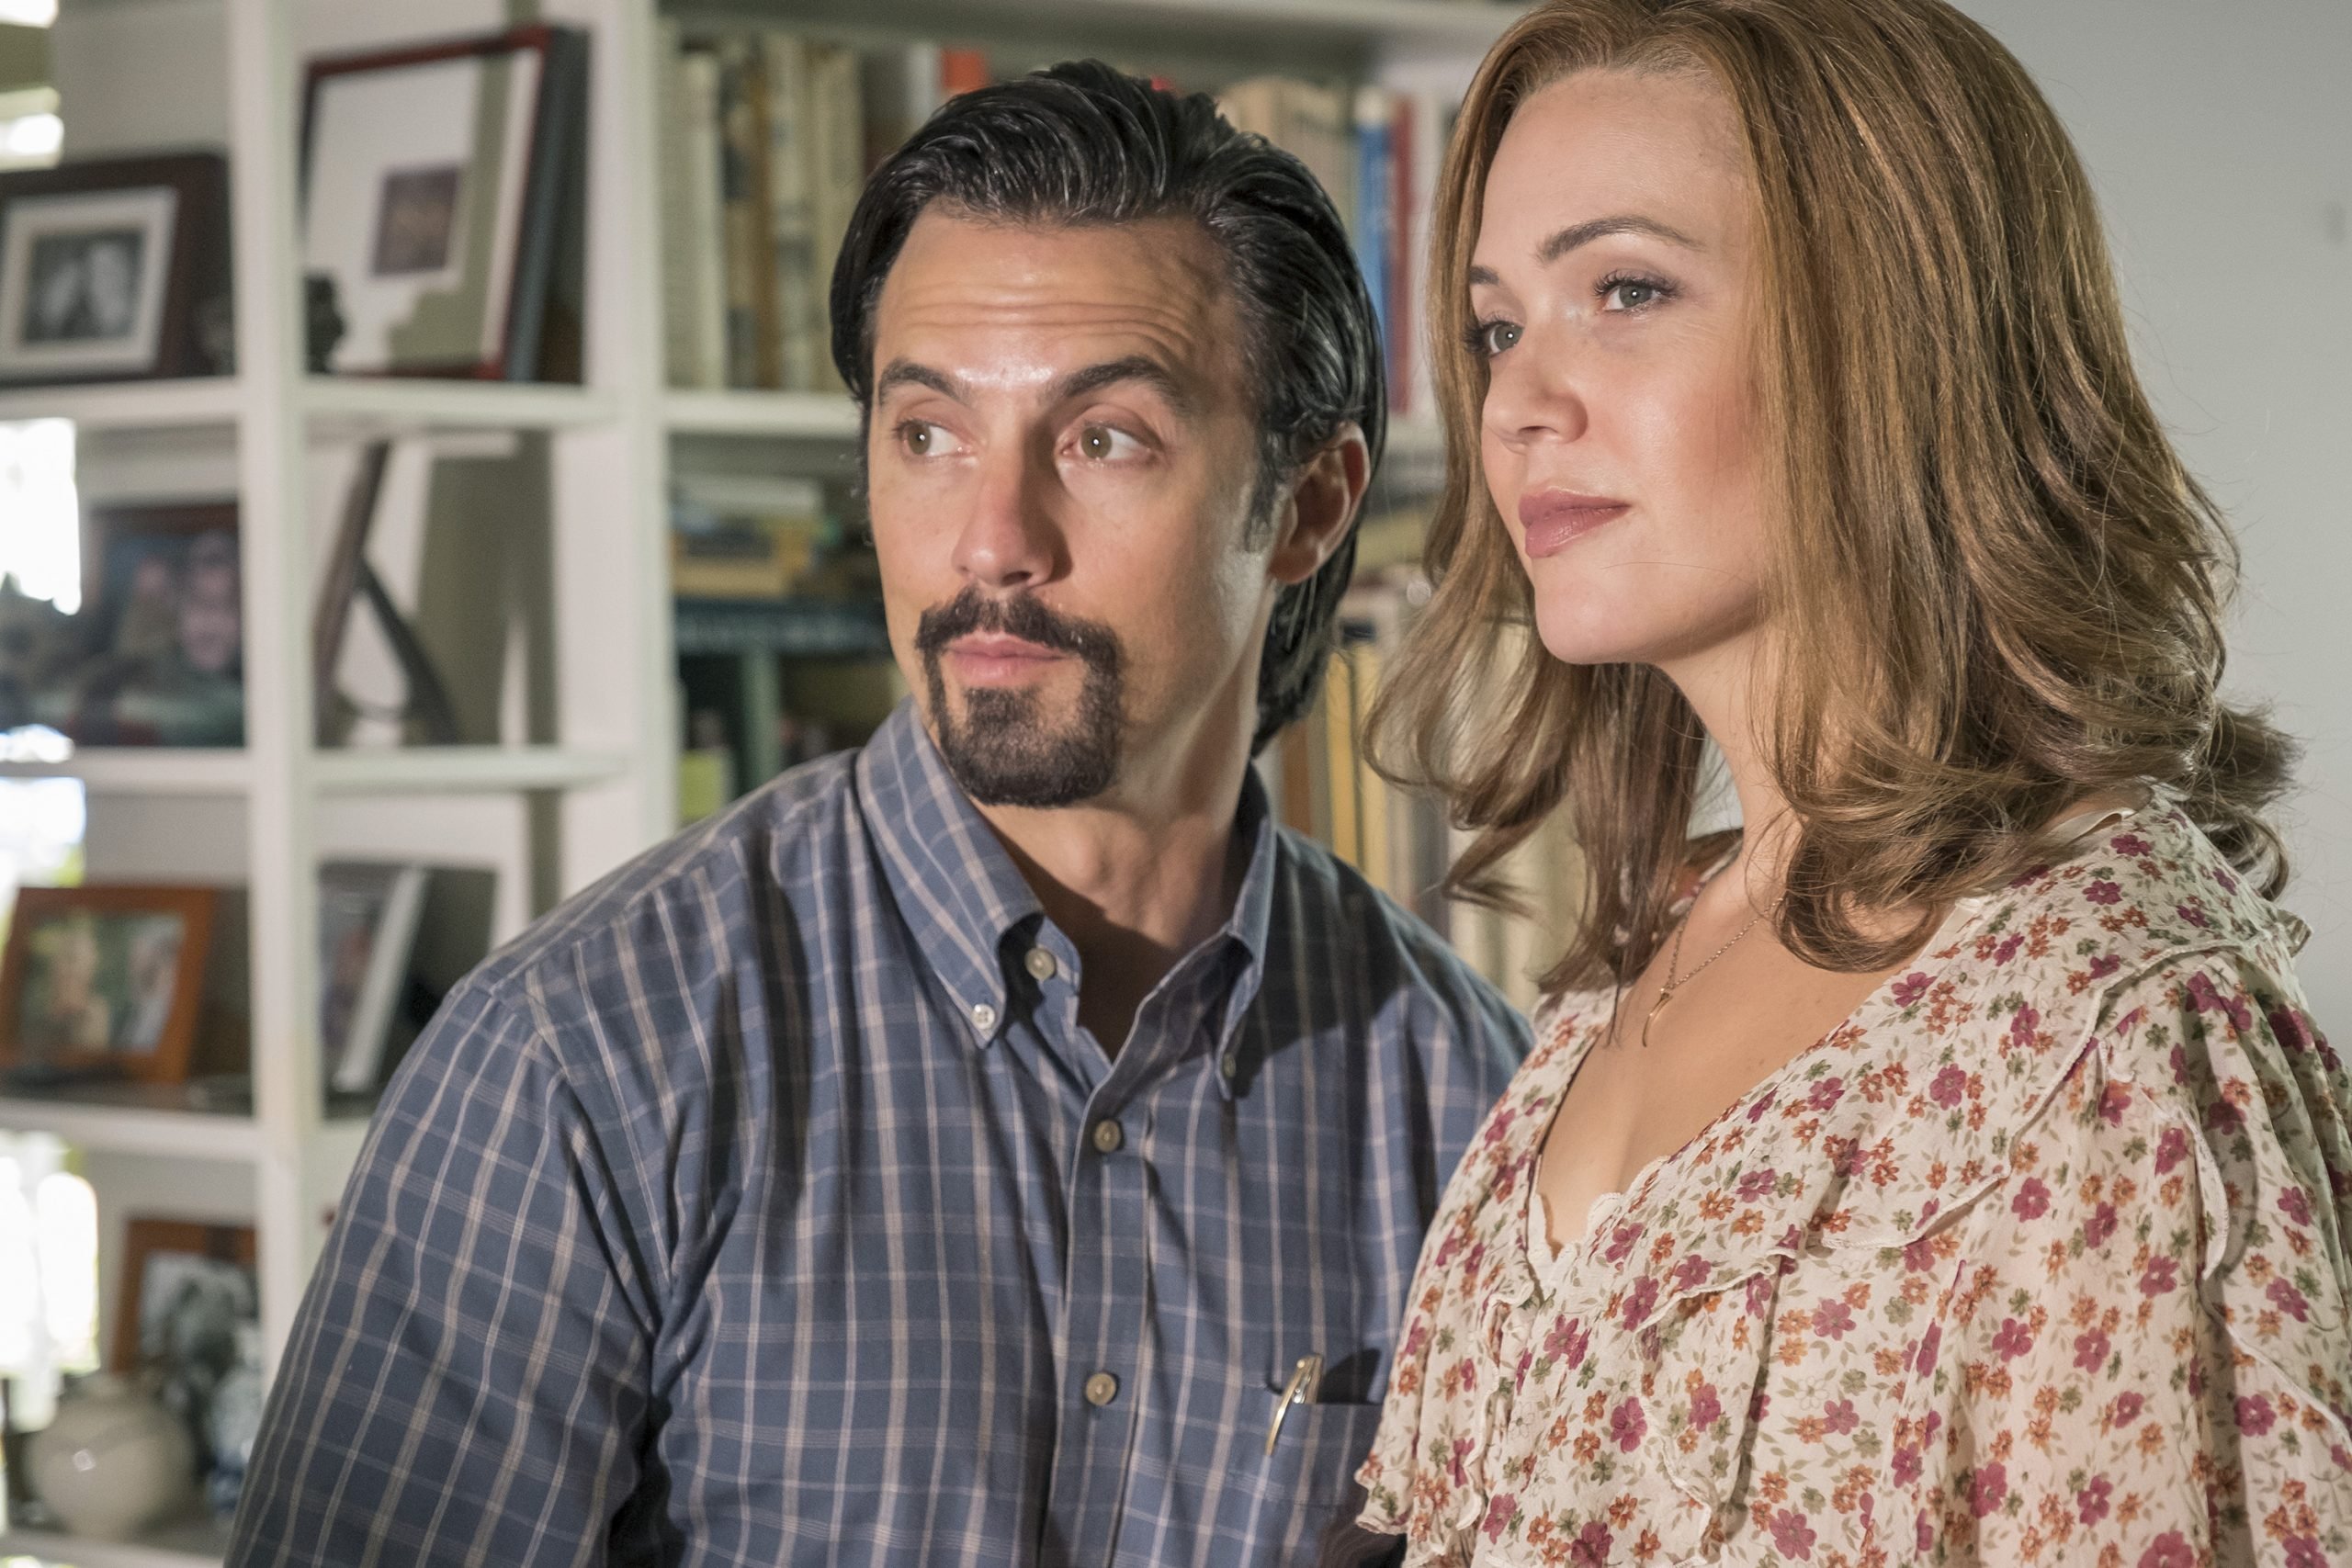 Milo Ventimiglia and Mandy Moore, in character as Jack and Rebecca in 'This Is Us' Season 3, share a scene.